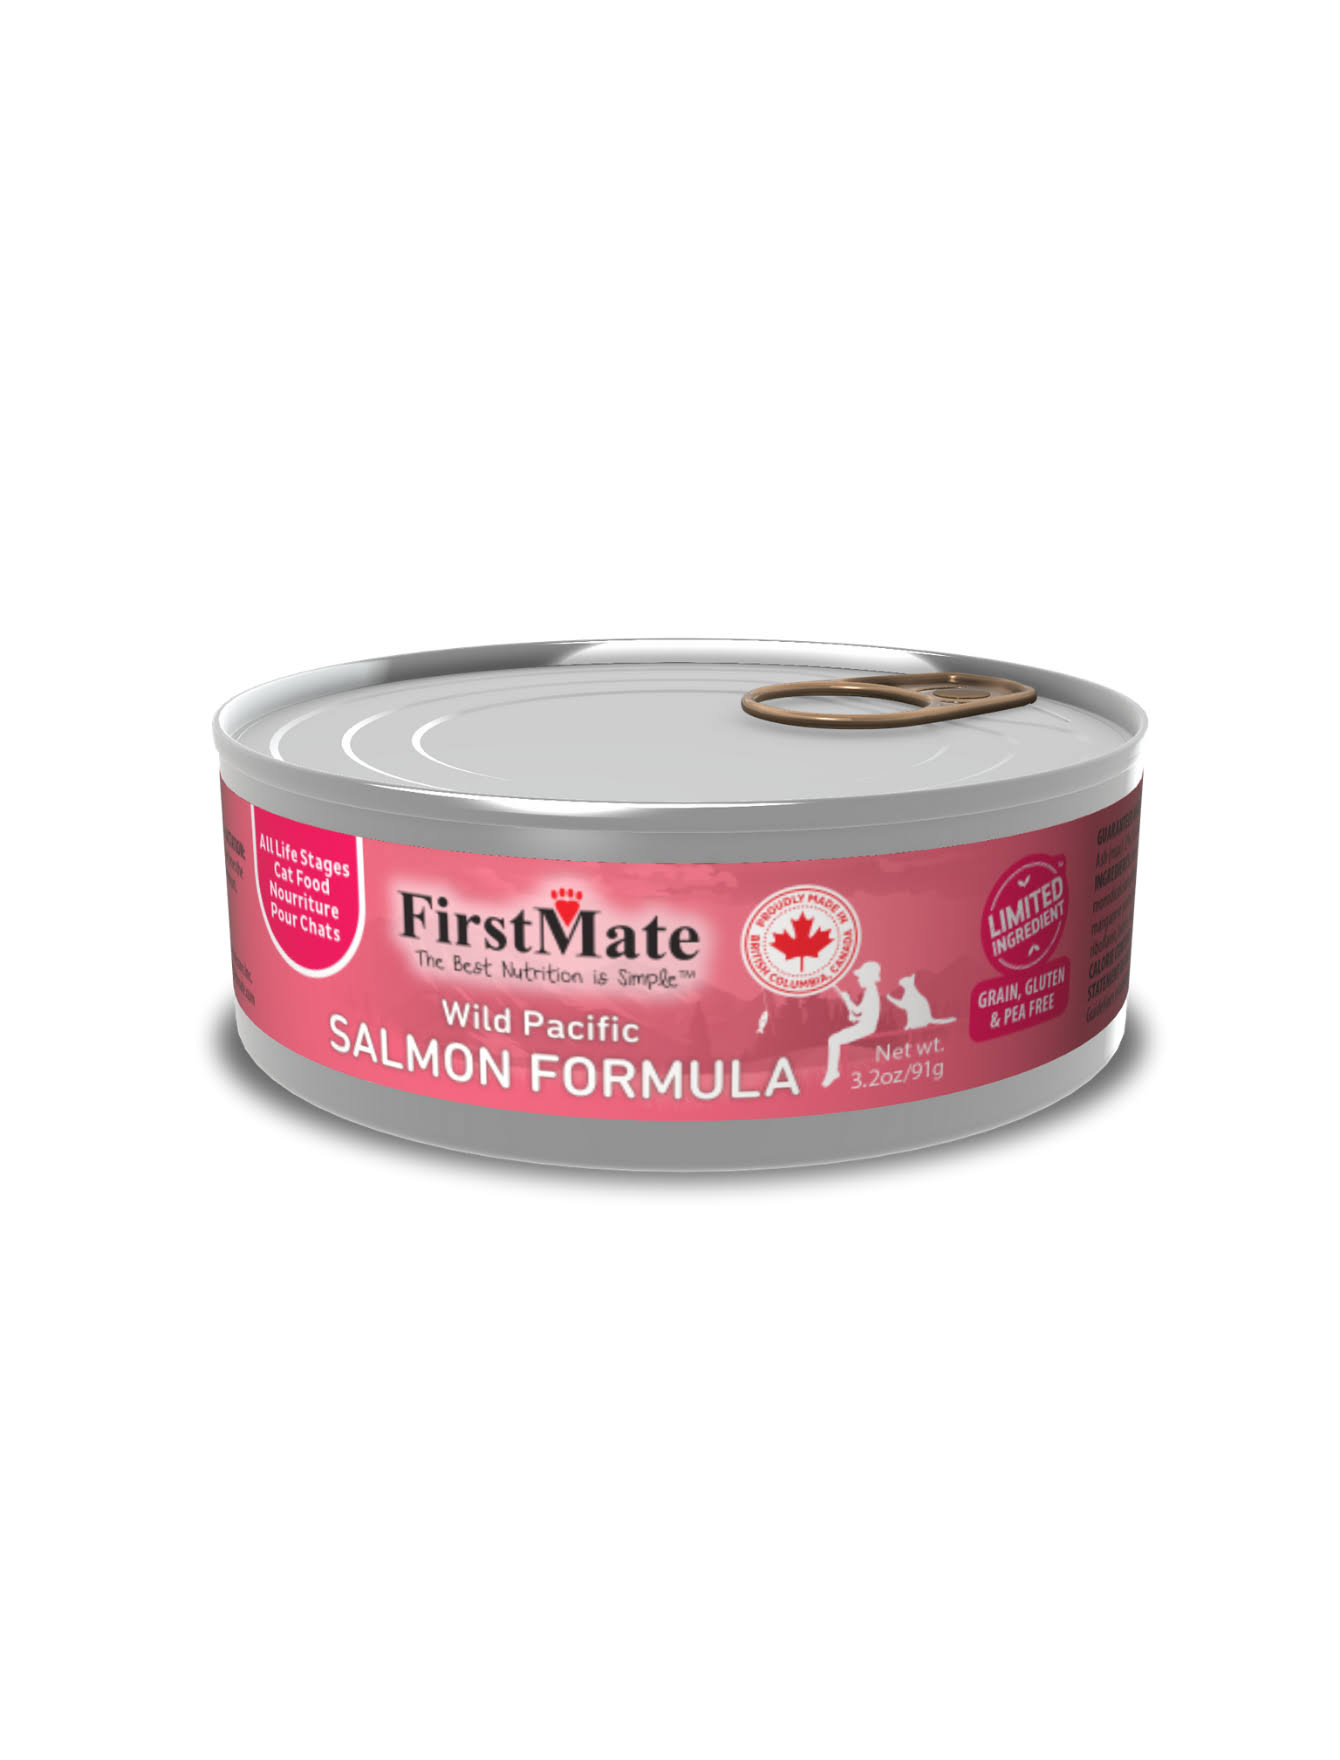 FirstMate Limited Ingredient Canned Cat Food 3.2oz - Wild Salmon